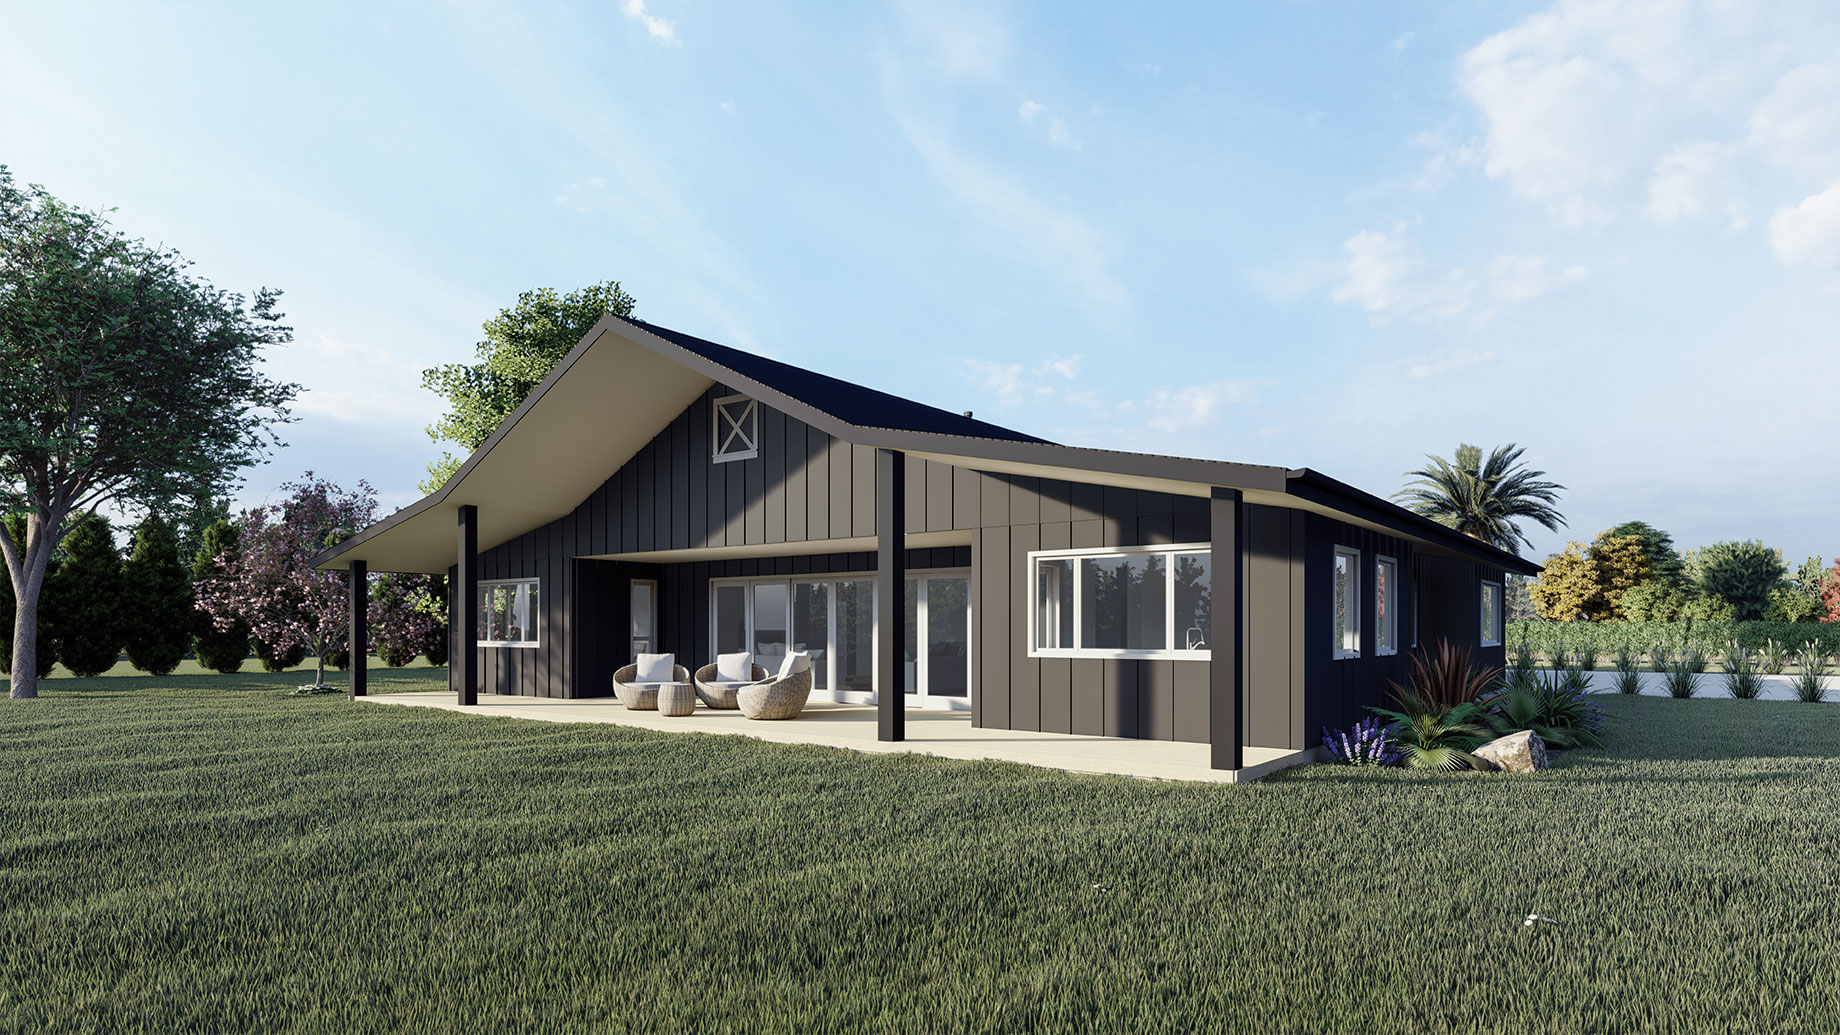 One storey barn style home render